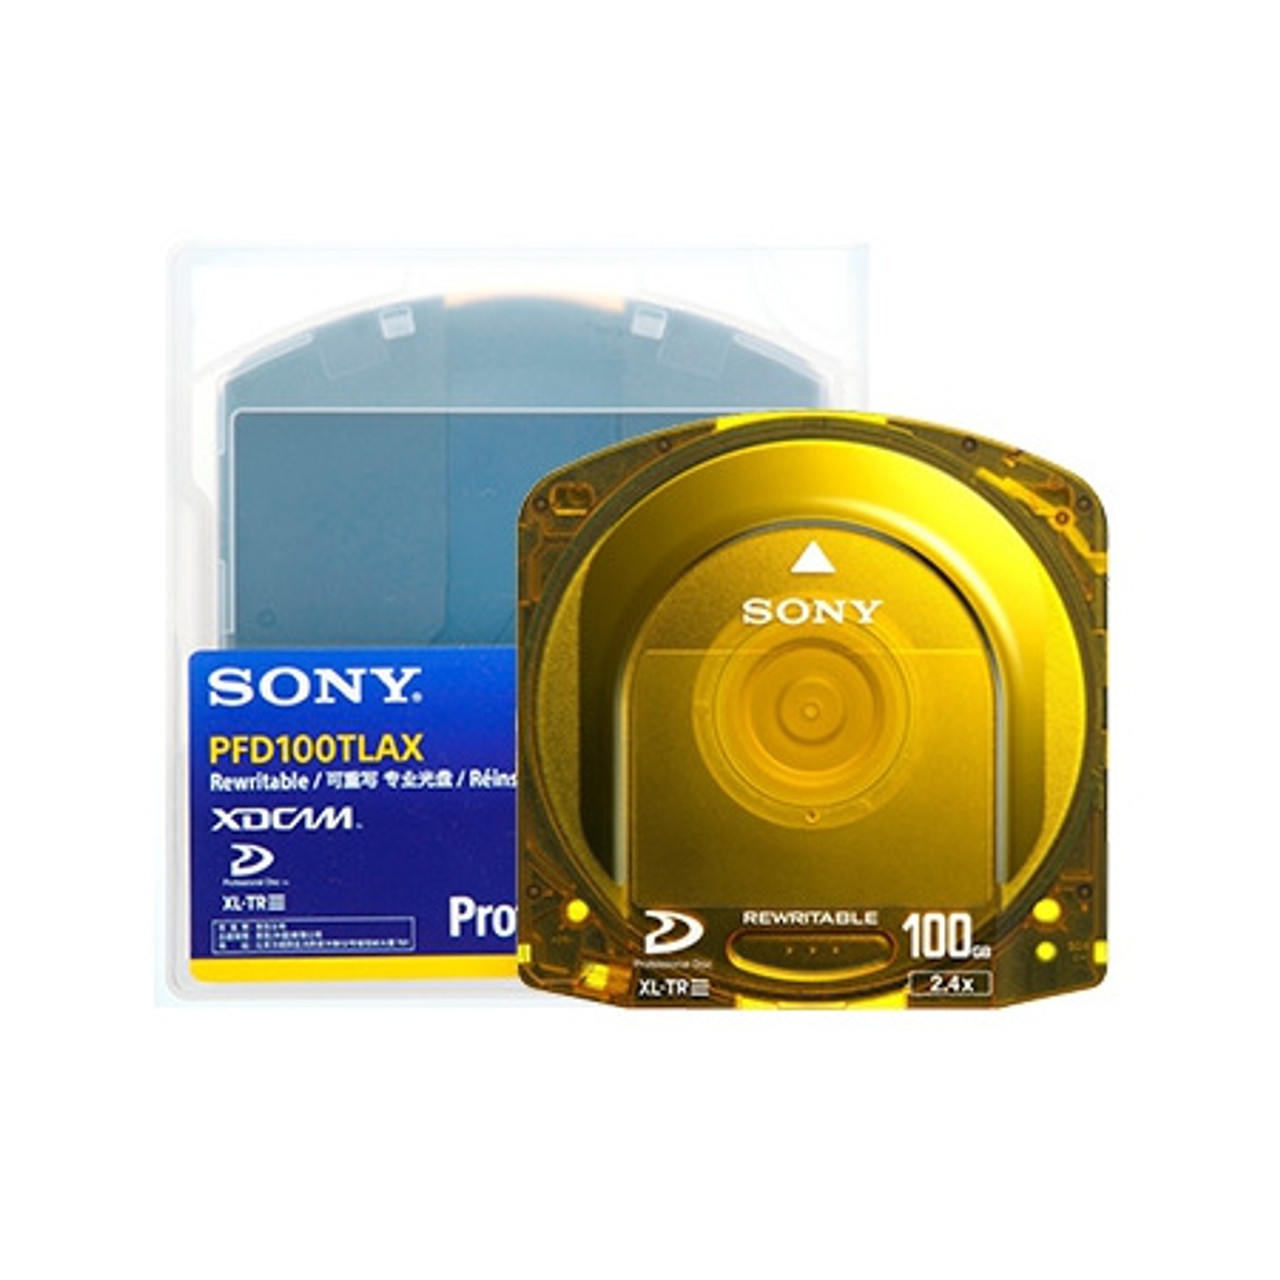 Sony XDCAM Triple-Layer Formatted Rewritable Professional Disc (100GB)  PFD100TLAX